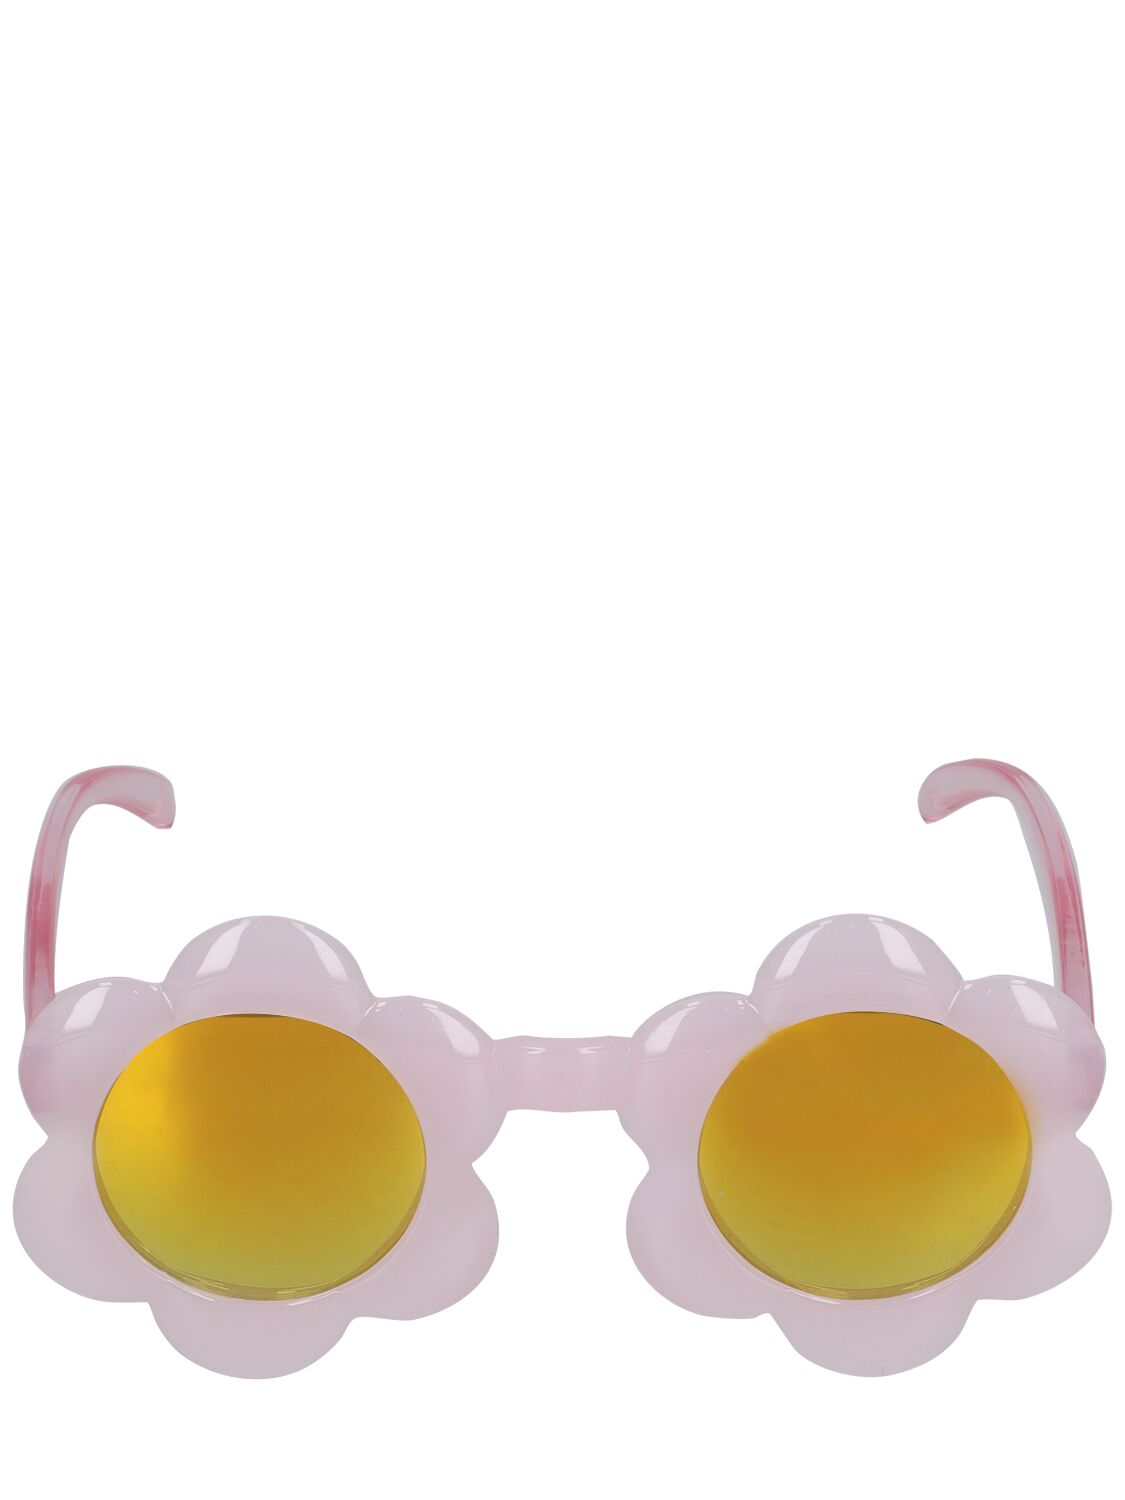 Image of Flower Polycarbonate Sunglasses